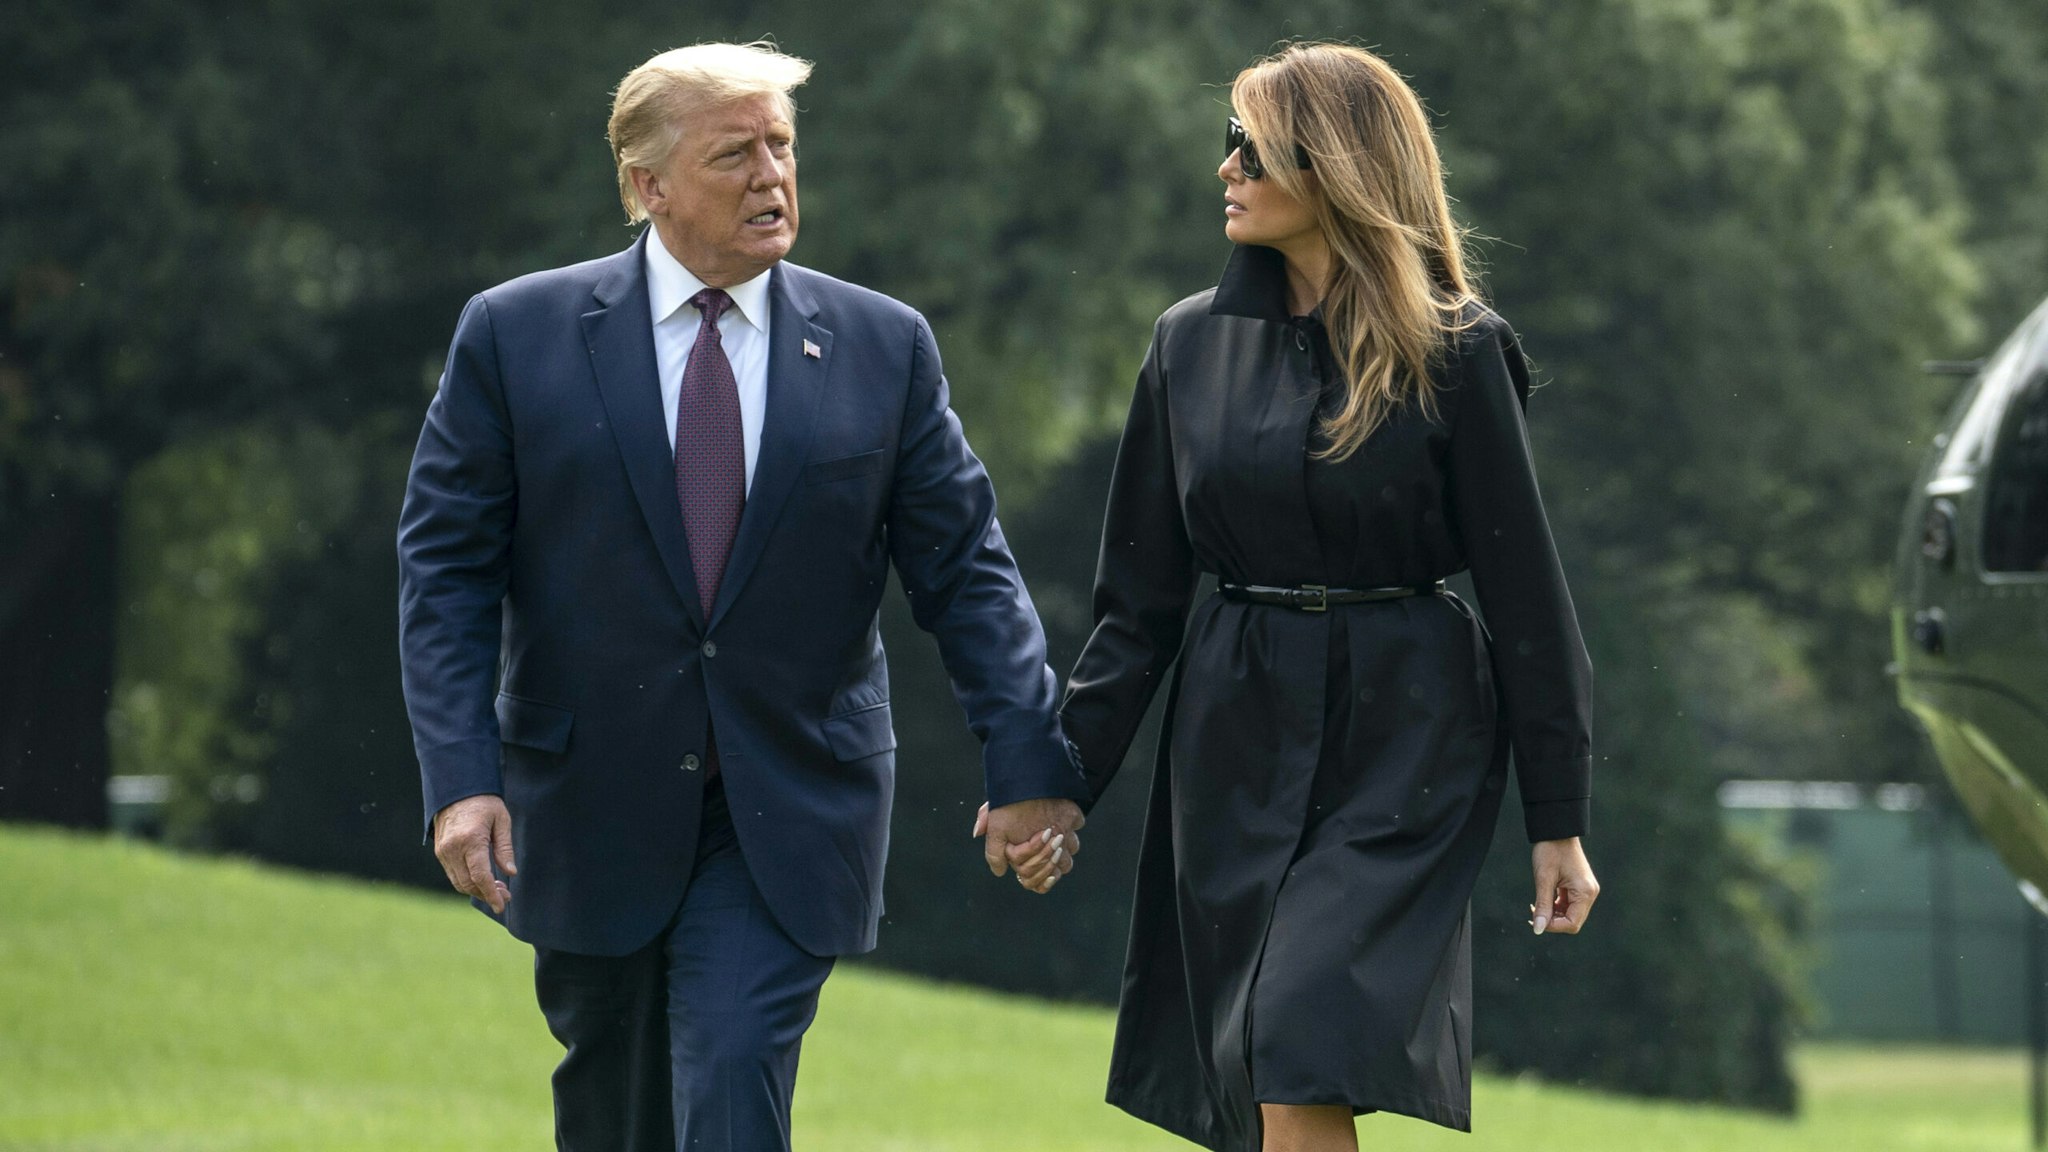 WASHINGTON, DC - SEPTEMBER 11: U.S. President Donald Trump and first lady Melania Trump walk to the White House residence as they exit Marine One on the South Lawn of the White House on September 11, 2020 in Washington, DC. President Trump and the First Lady traveled earlier to the Flight 93 National Memorial in Shanksville, Pennsylvania to mark the 19th anniversary of the September 11th attacks.